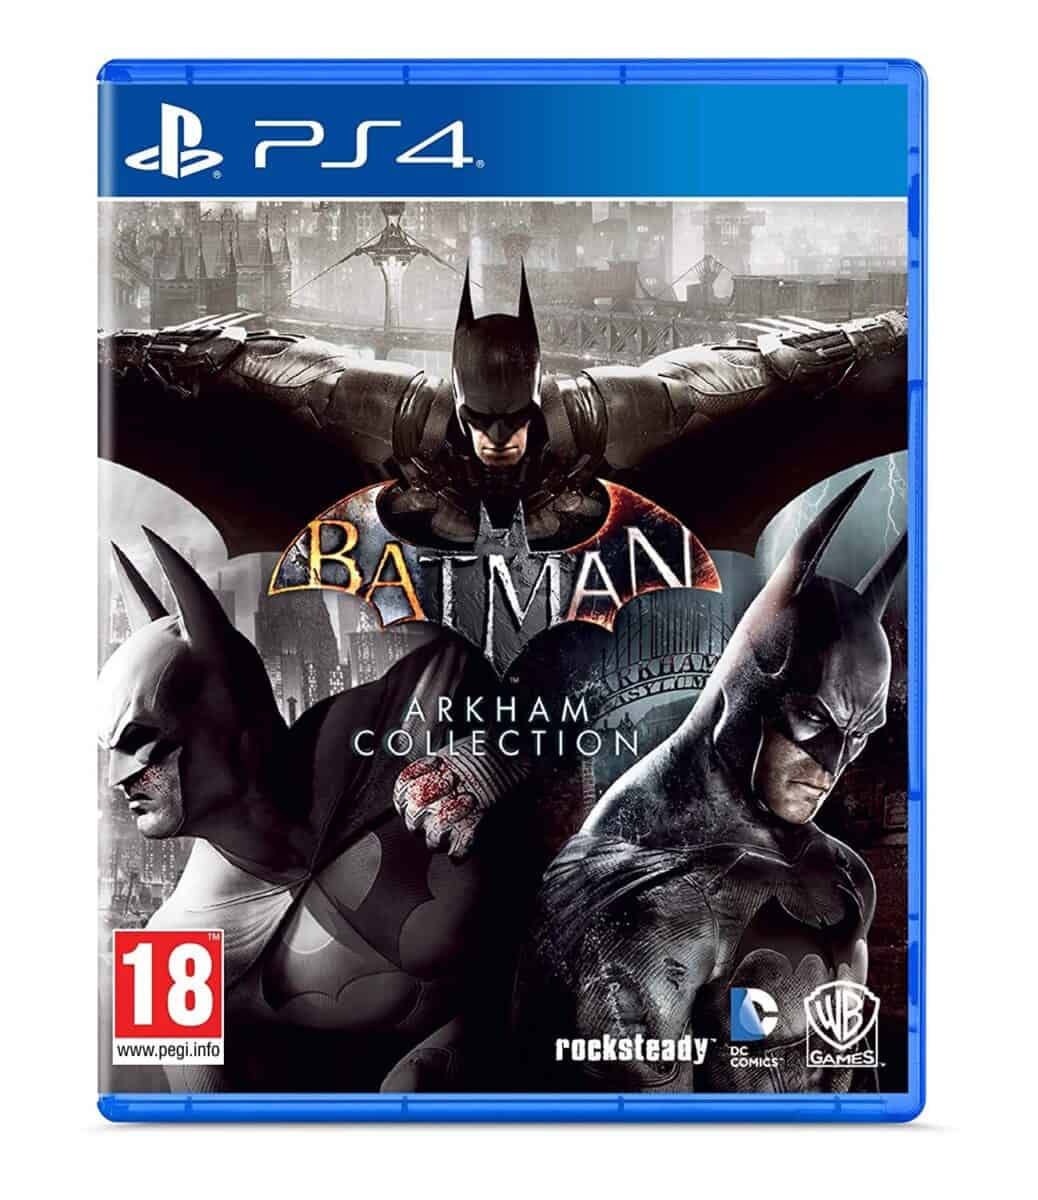 The front cover of Batman PlayStation Now games